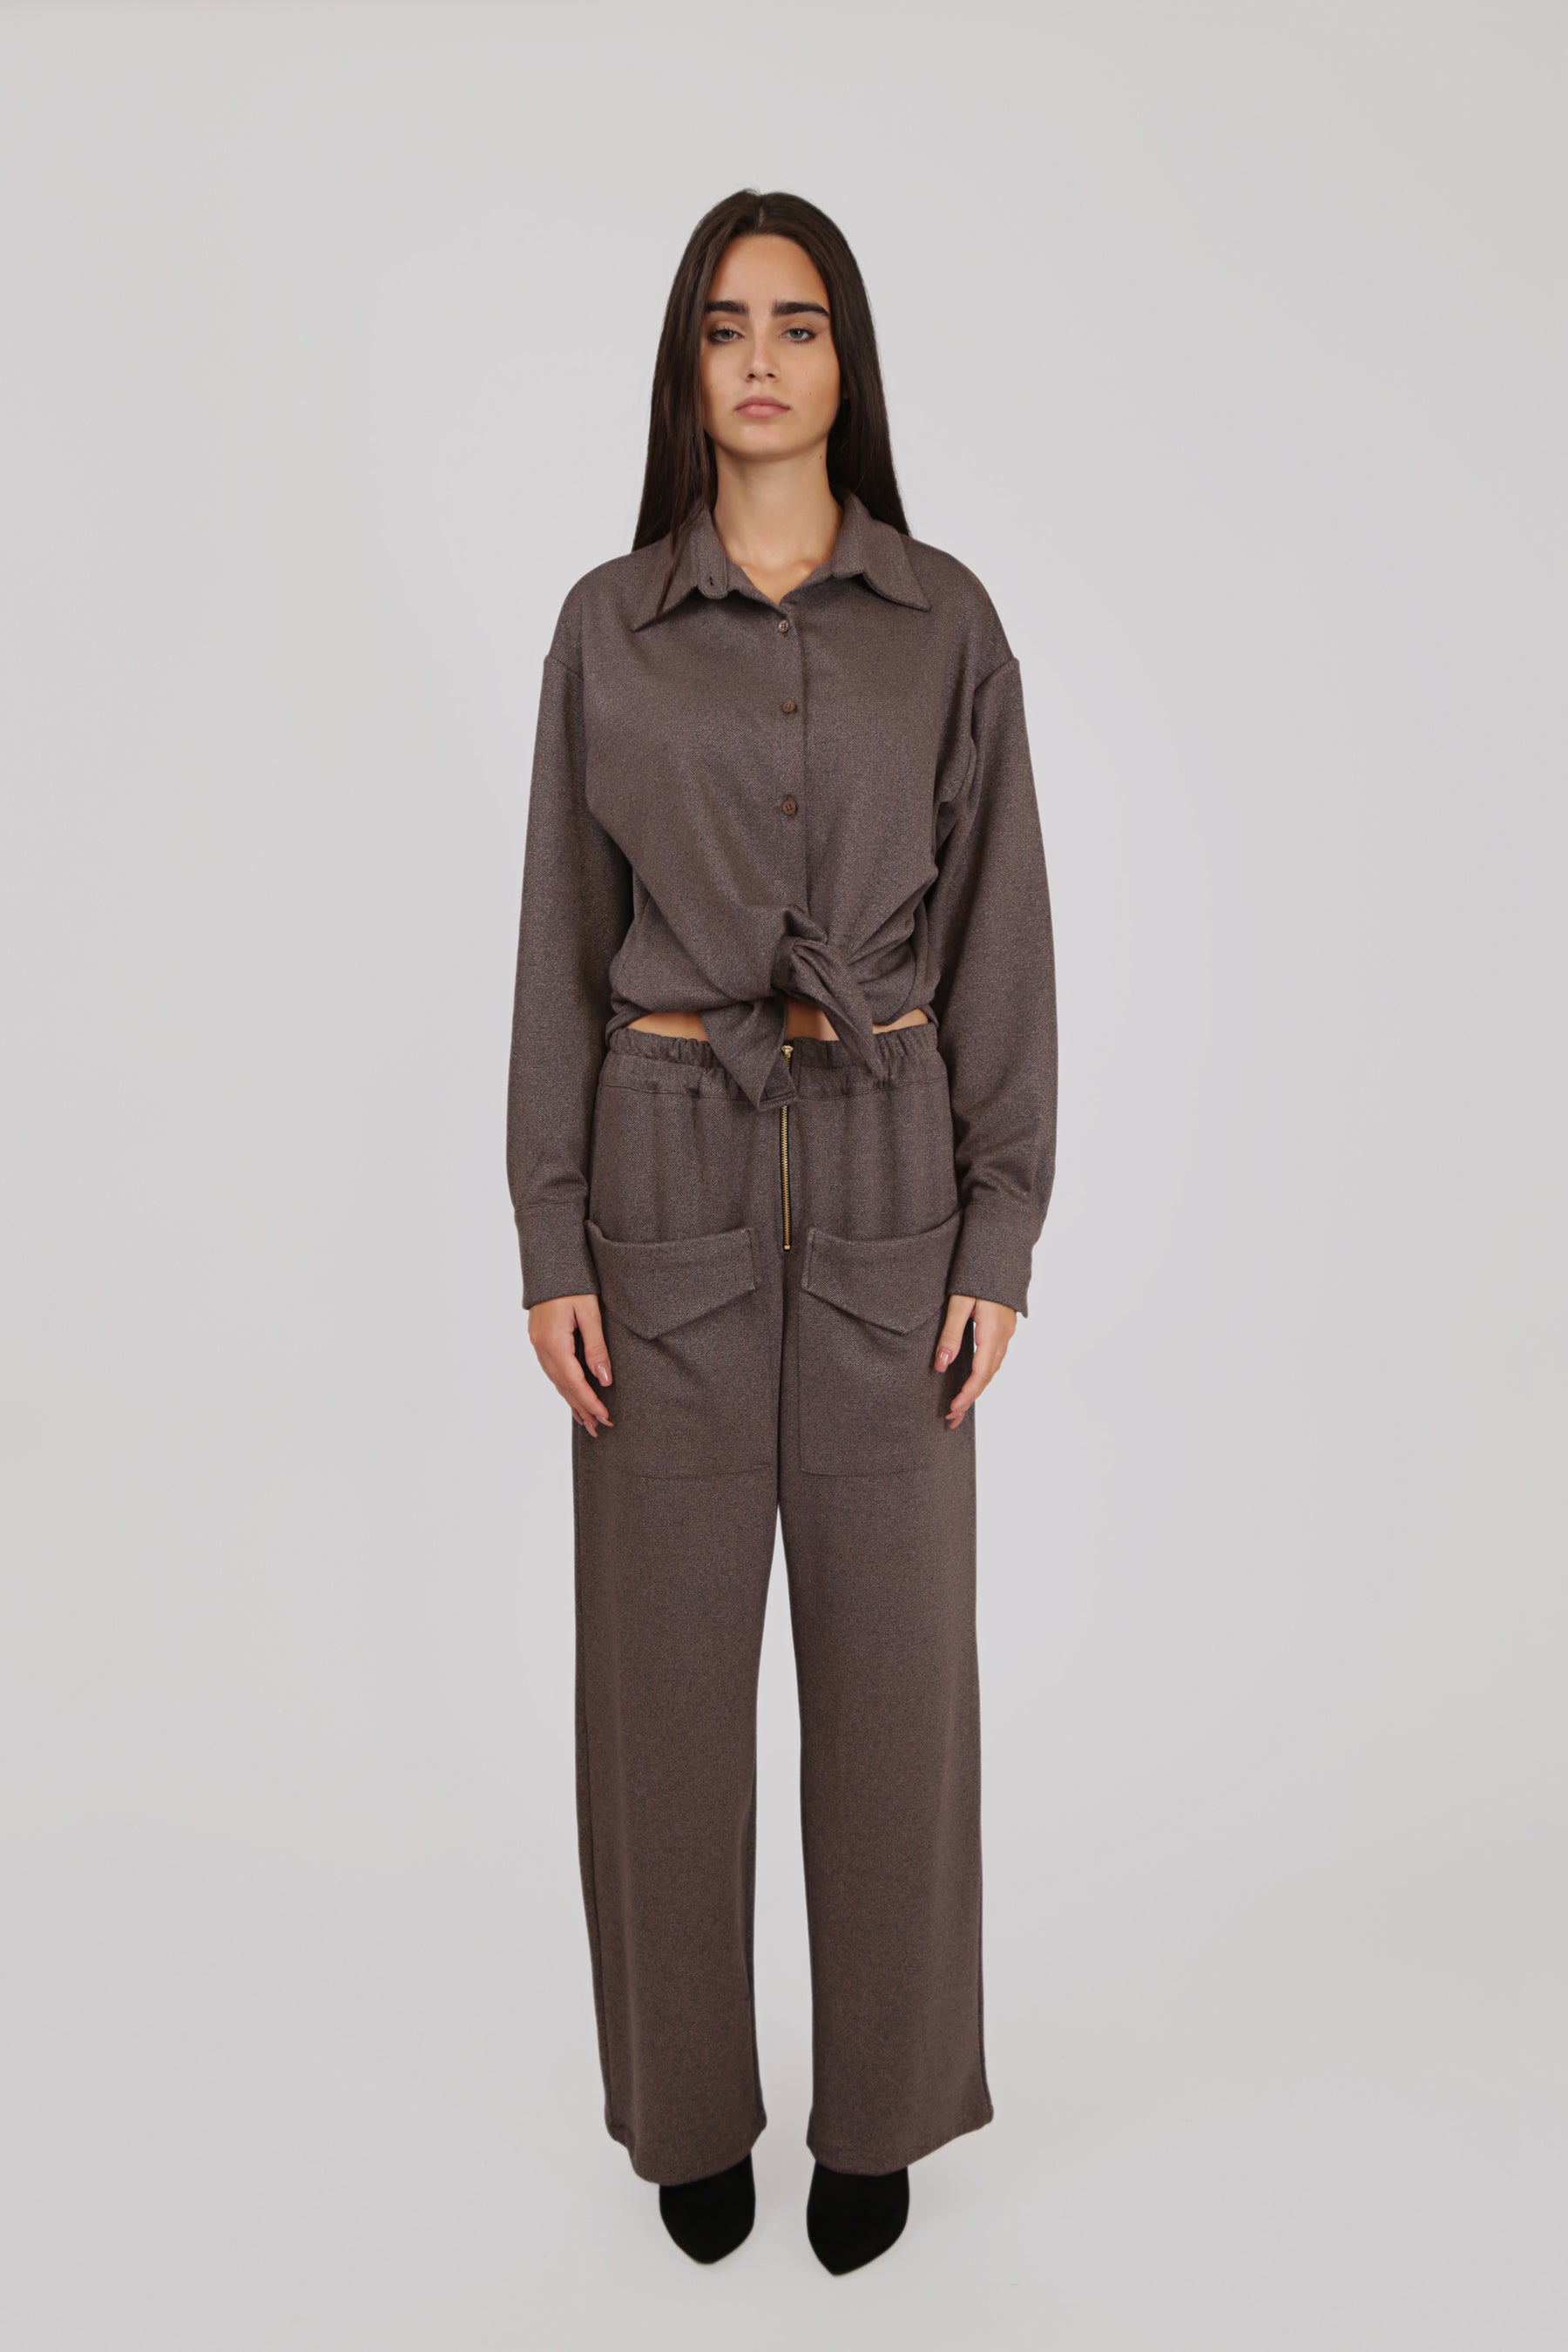 Textured Shirt and Pants with Frontal Pockets